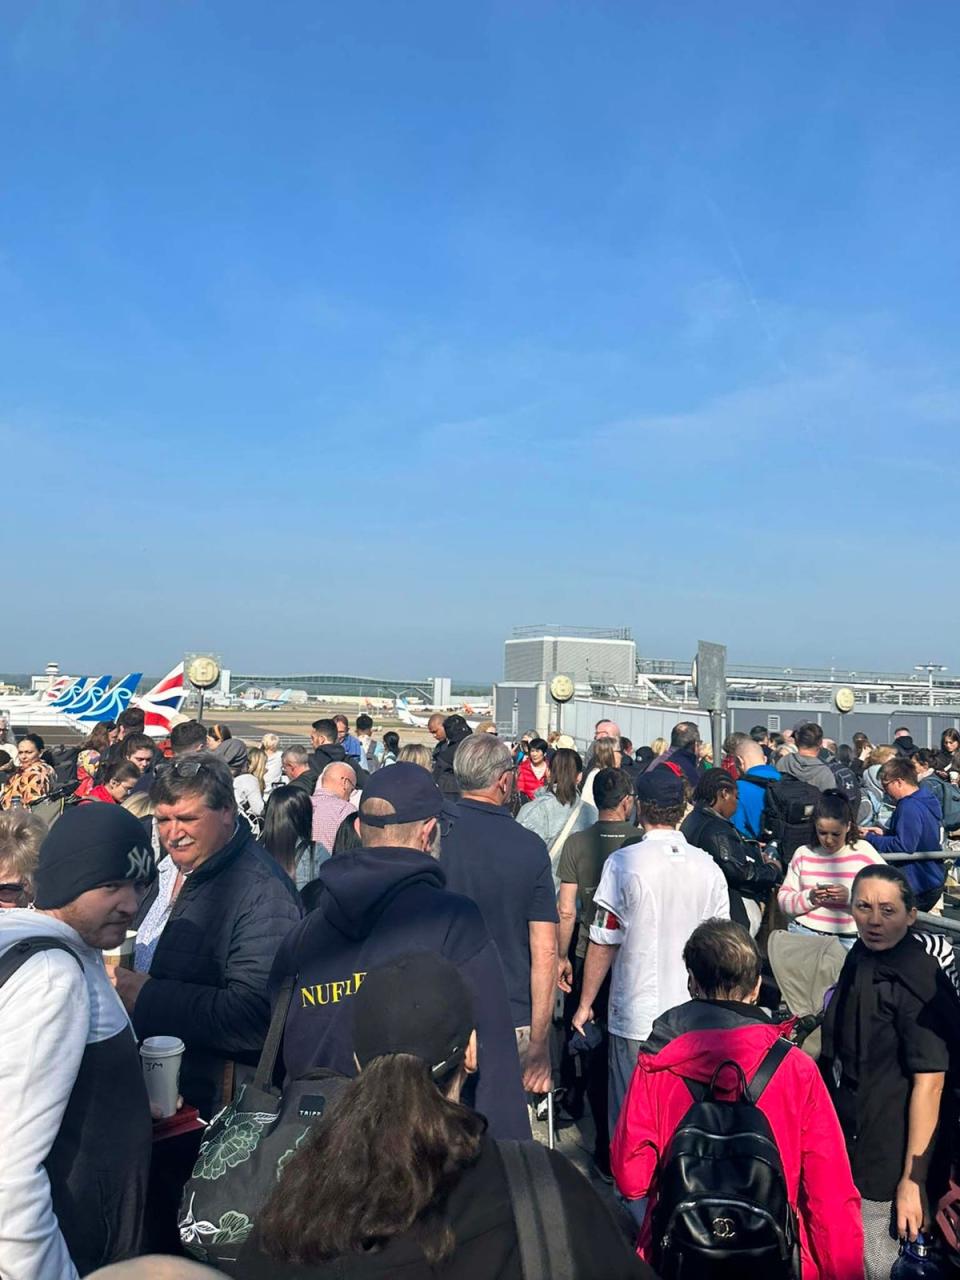 London Gatwick’s South Terminal was evacuated causing travel chaos for departing passengers (Kevin Edger)